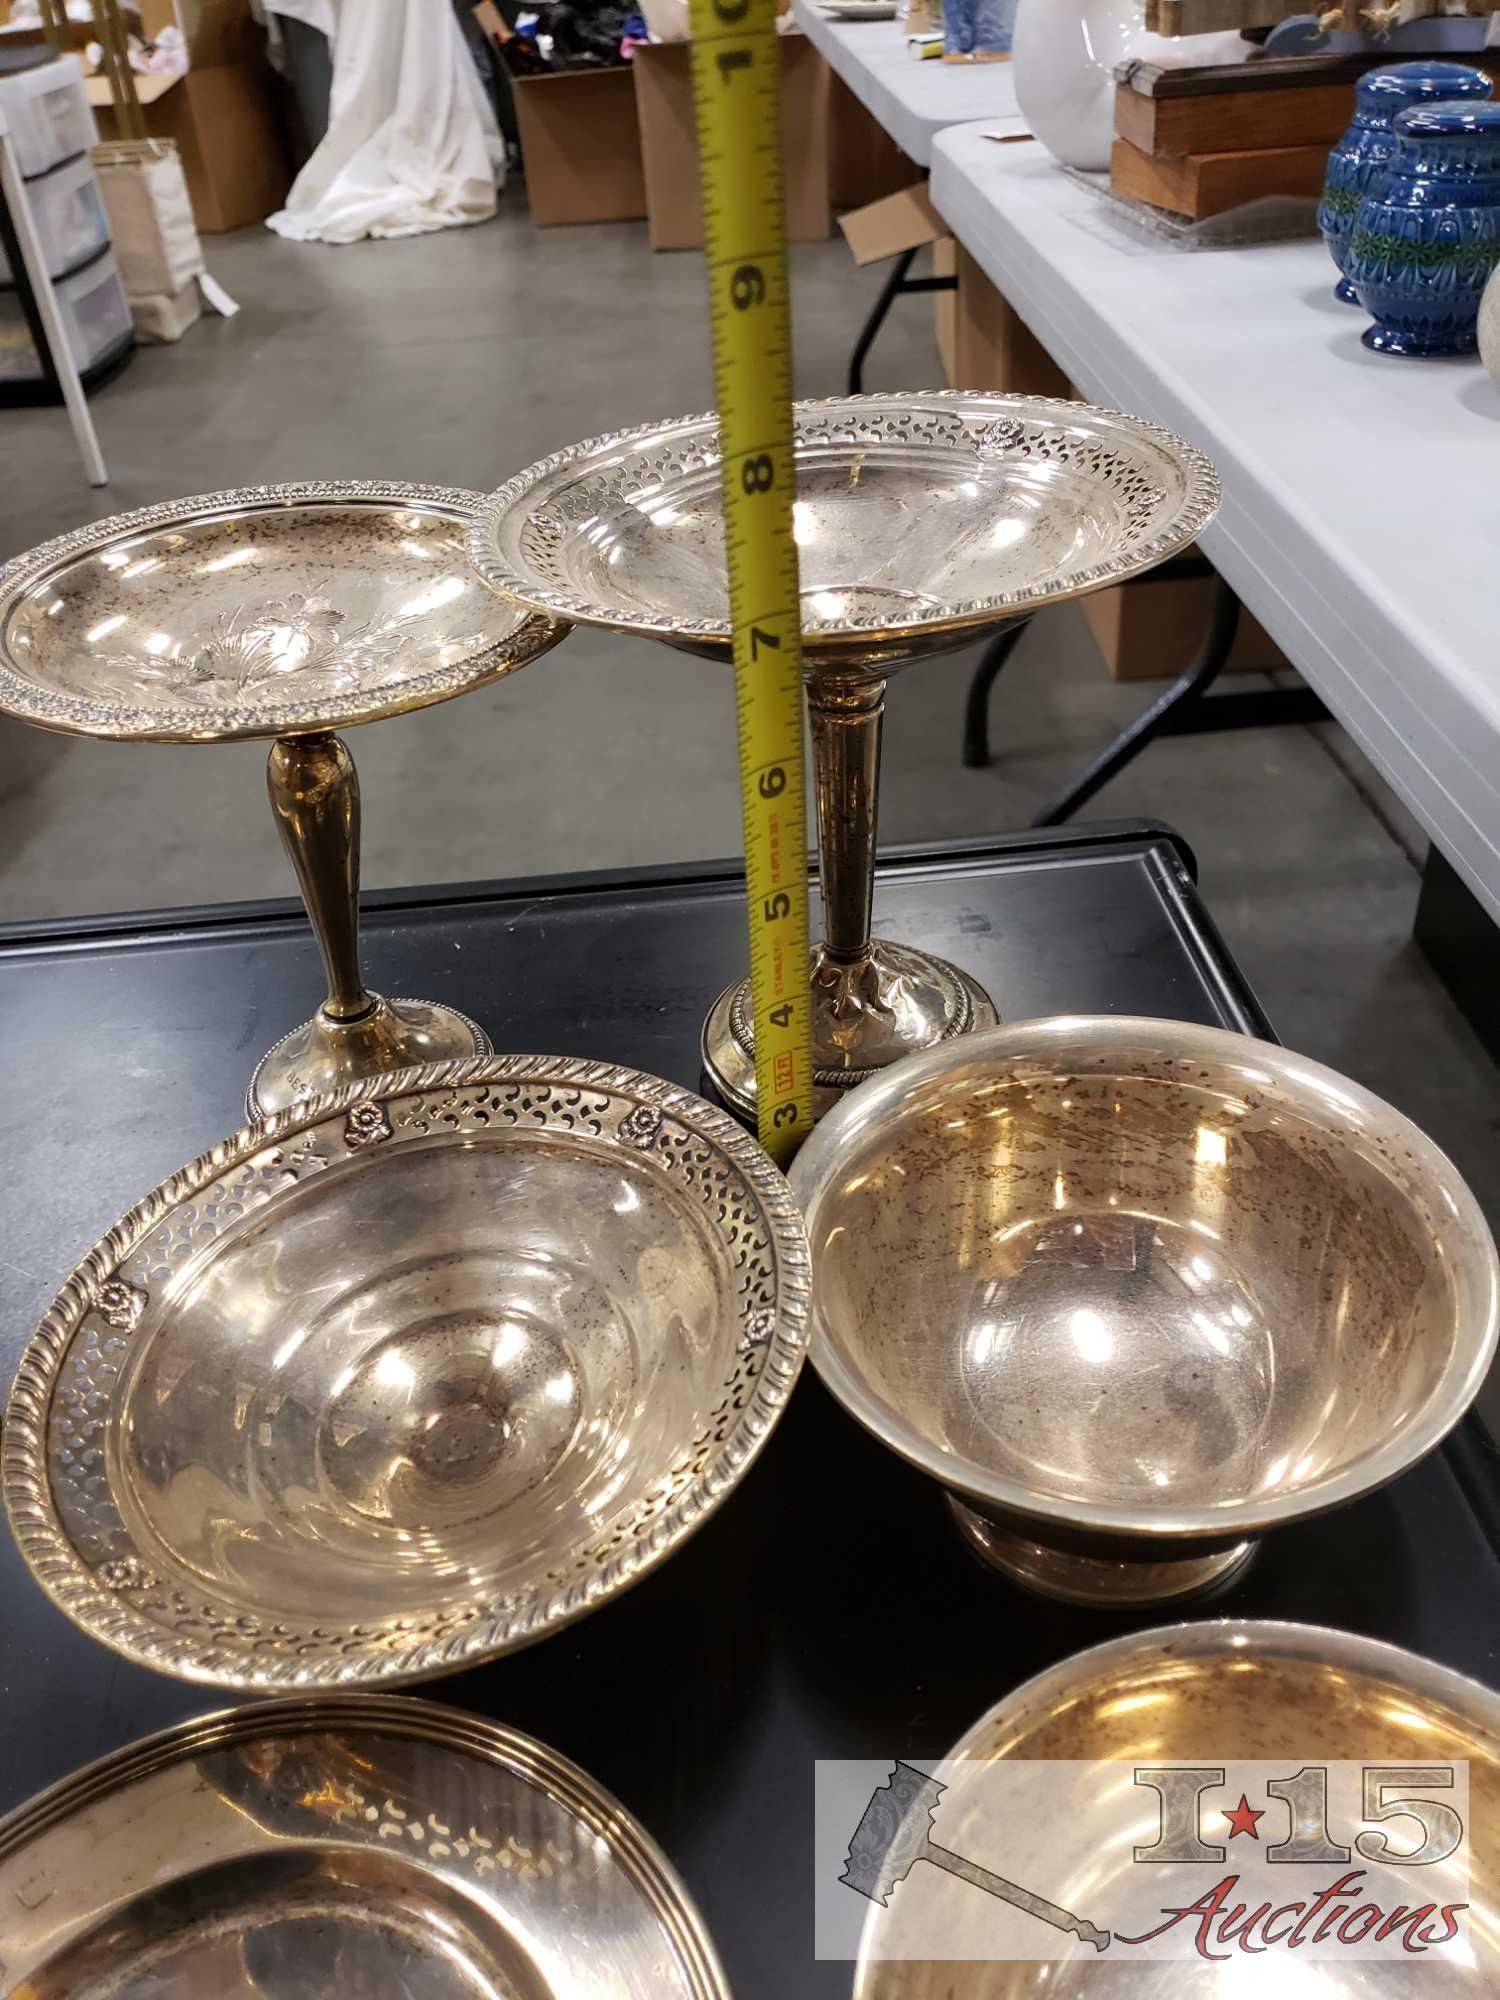 4pieces of Sterling silver Plates, candy dishes weighs 424 plus 4 pieces with weighted bases